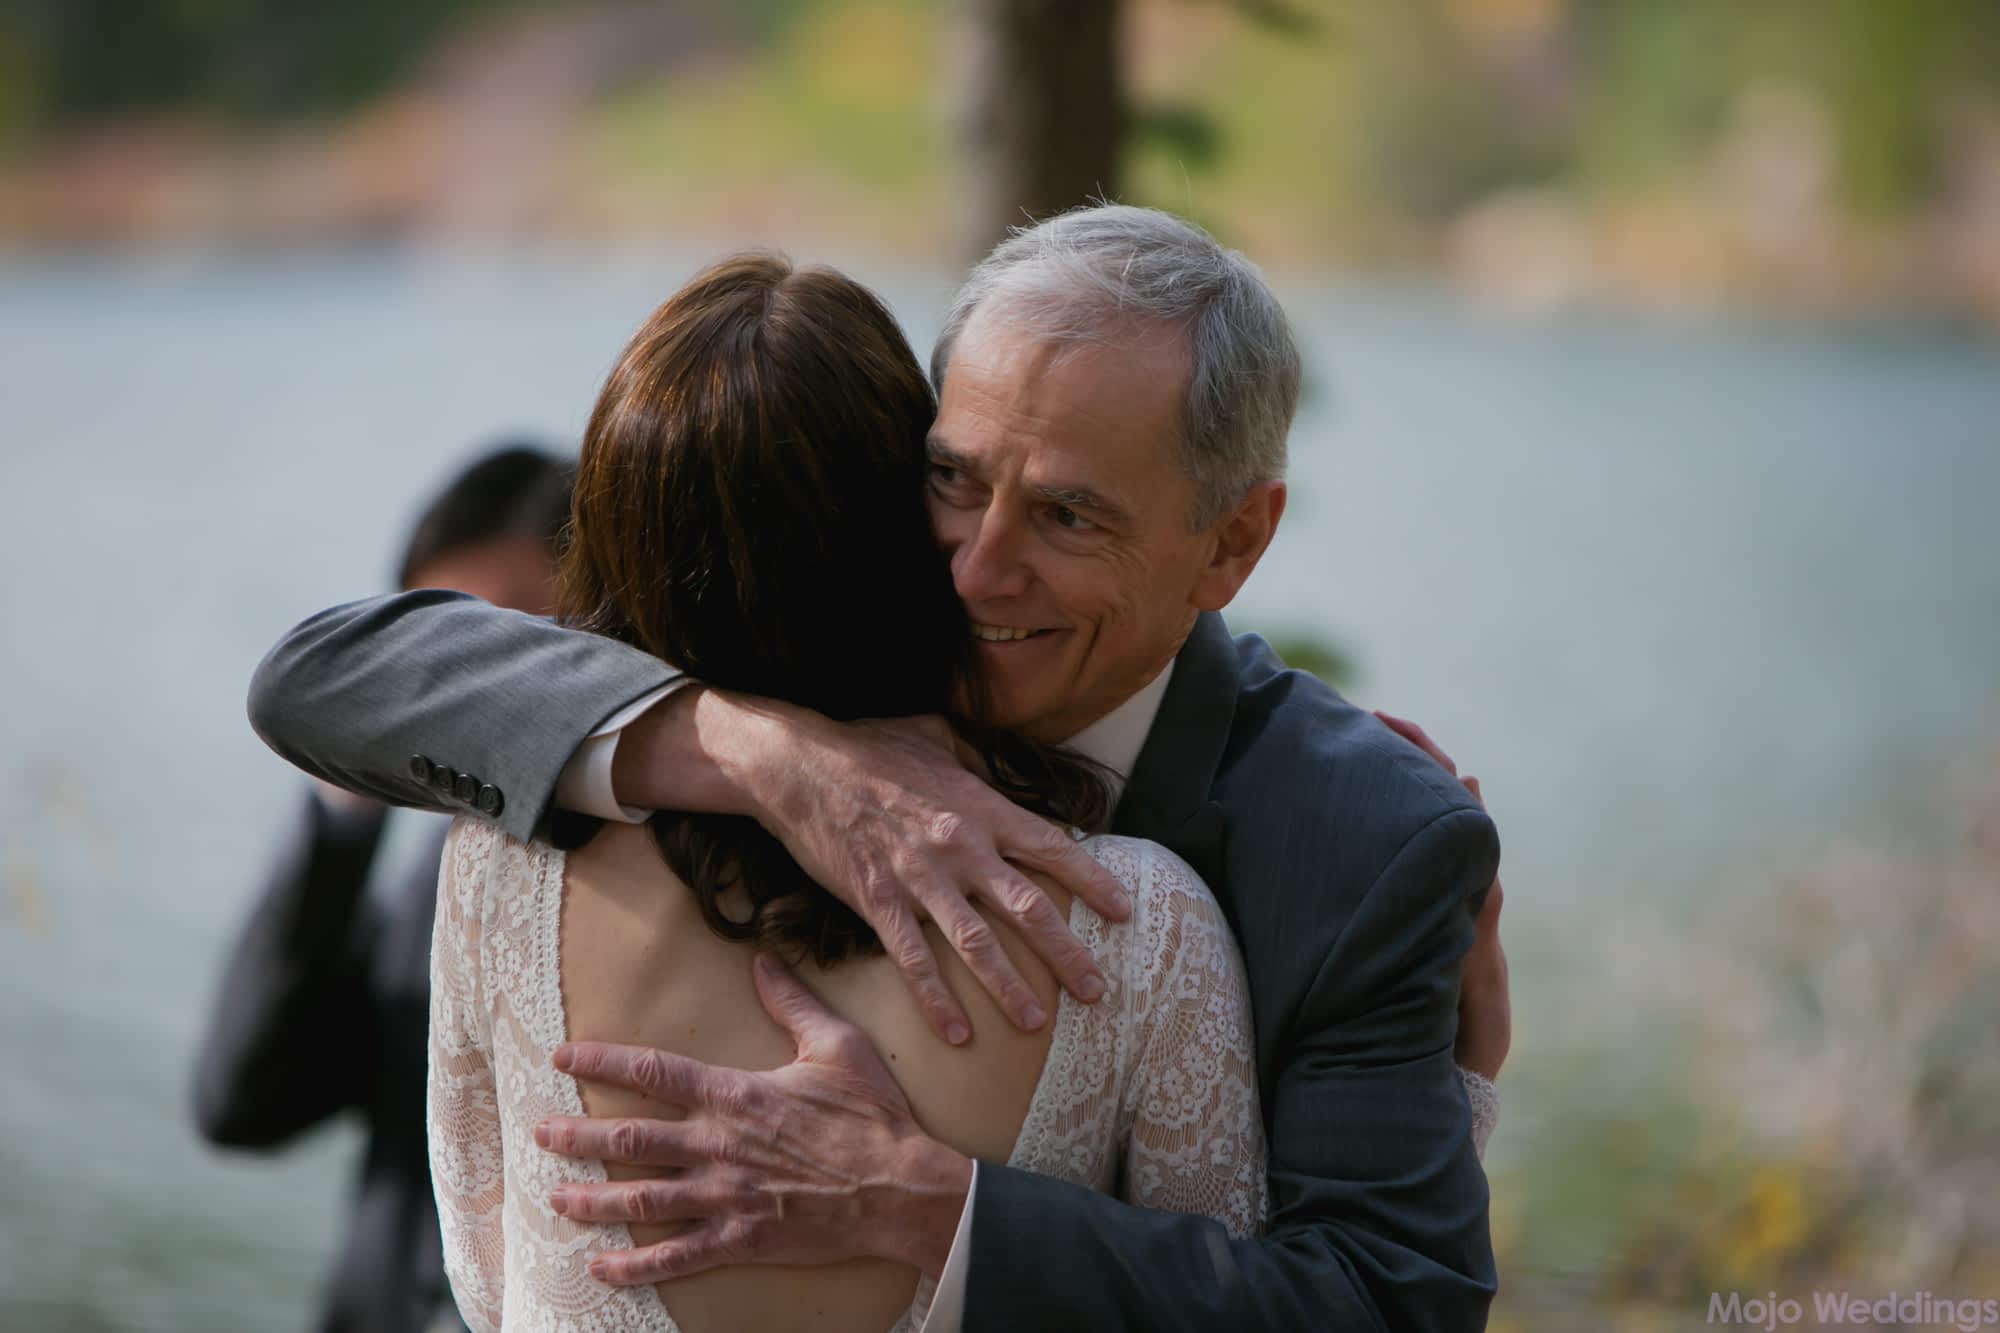 The father of the bride hugs his daughter.